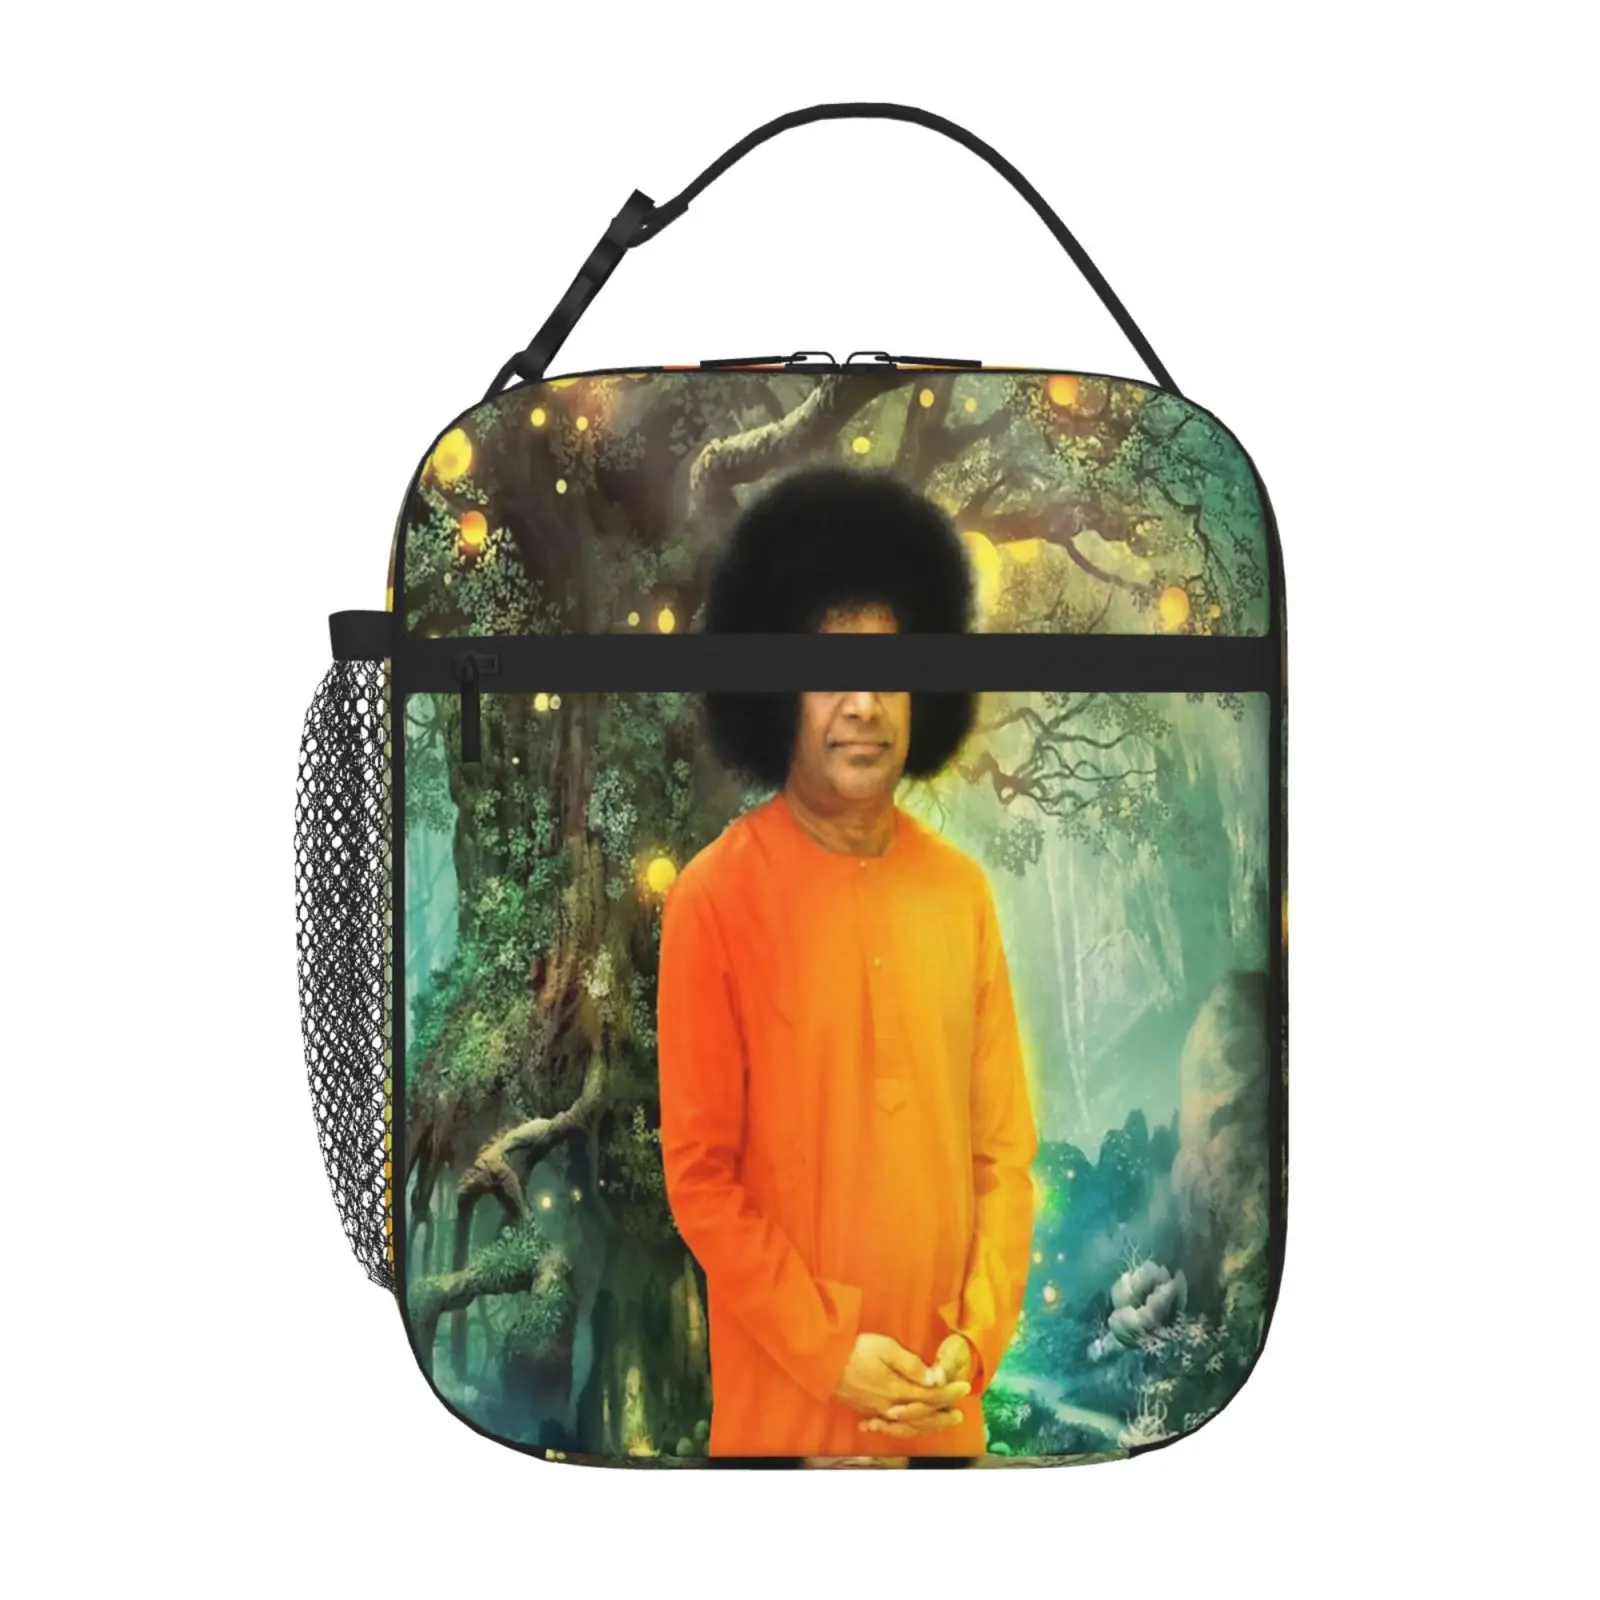 

Sathya Sai - 2 Sathya's Corner Insulated Bag Lunch Tote Cute Lunch Bag